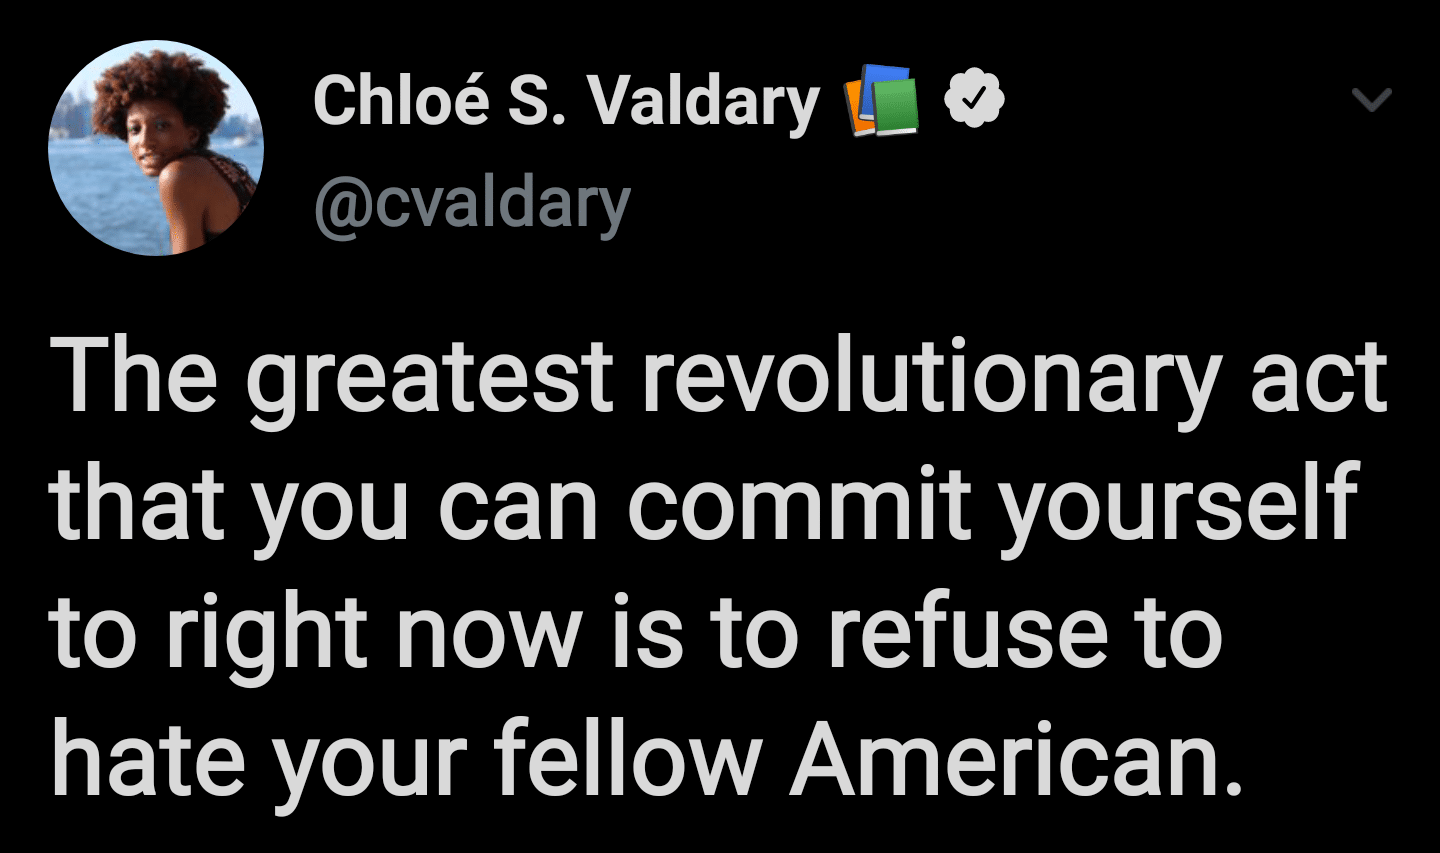 Black, Or Love, Enemies Wholesome Memes Black, Or Love, Enemies text: Chloé S. Valdary O @cvaldary The greatest revolutionary act that you can commit yourself to right now is to refuse to hate your fellow American. 